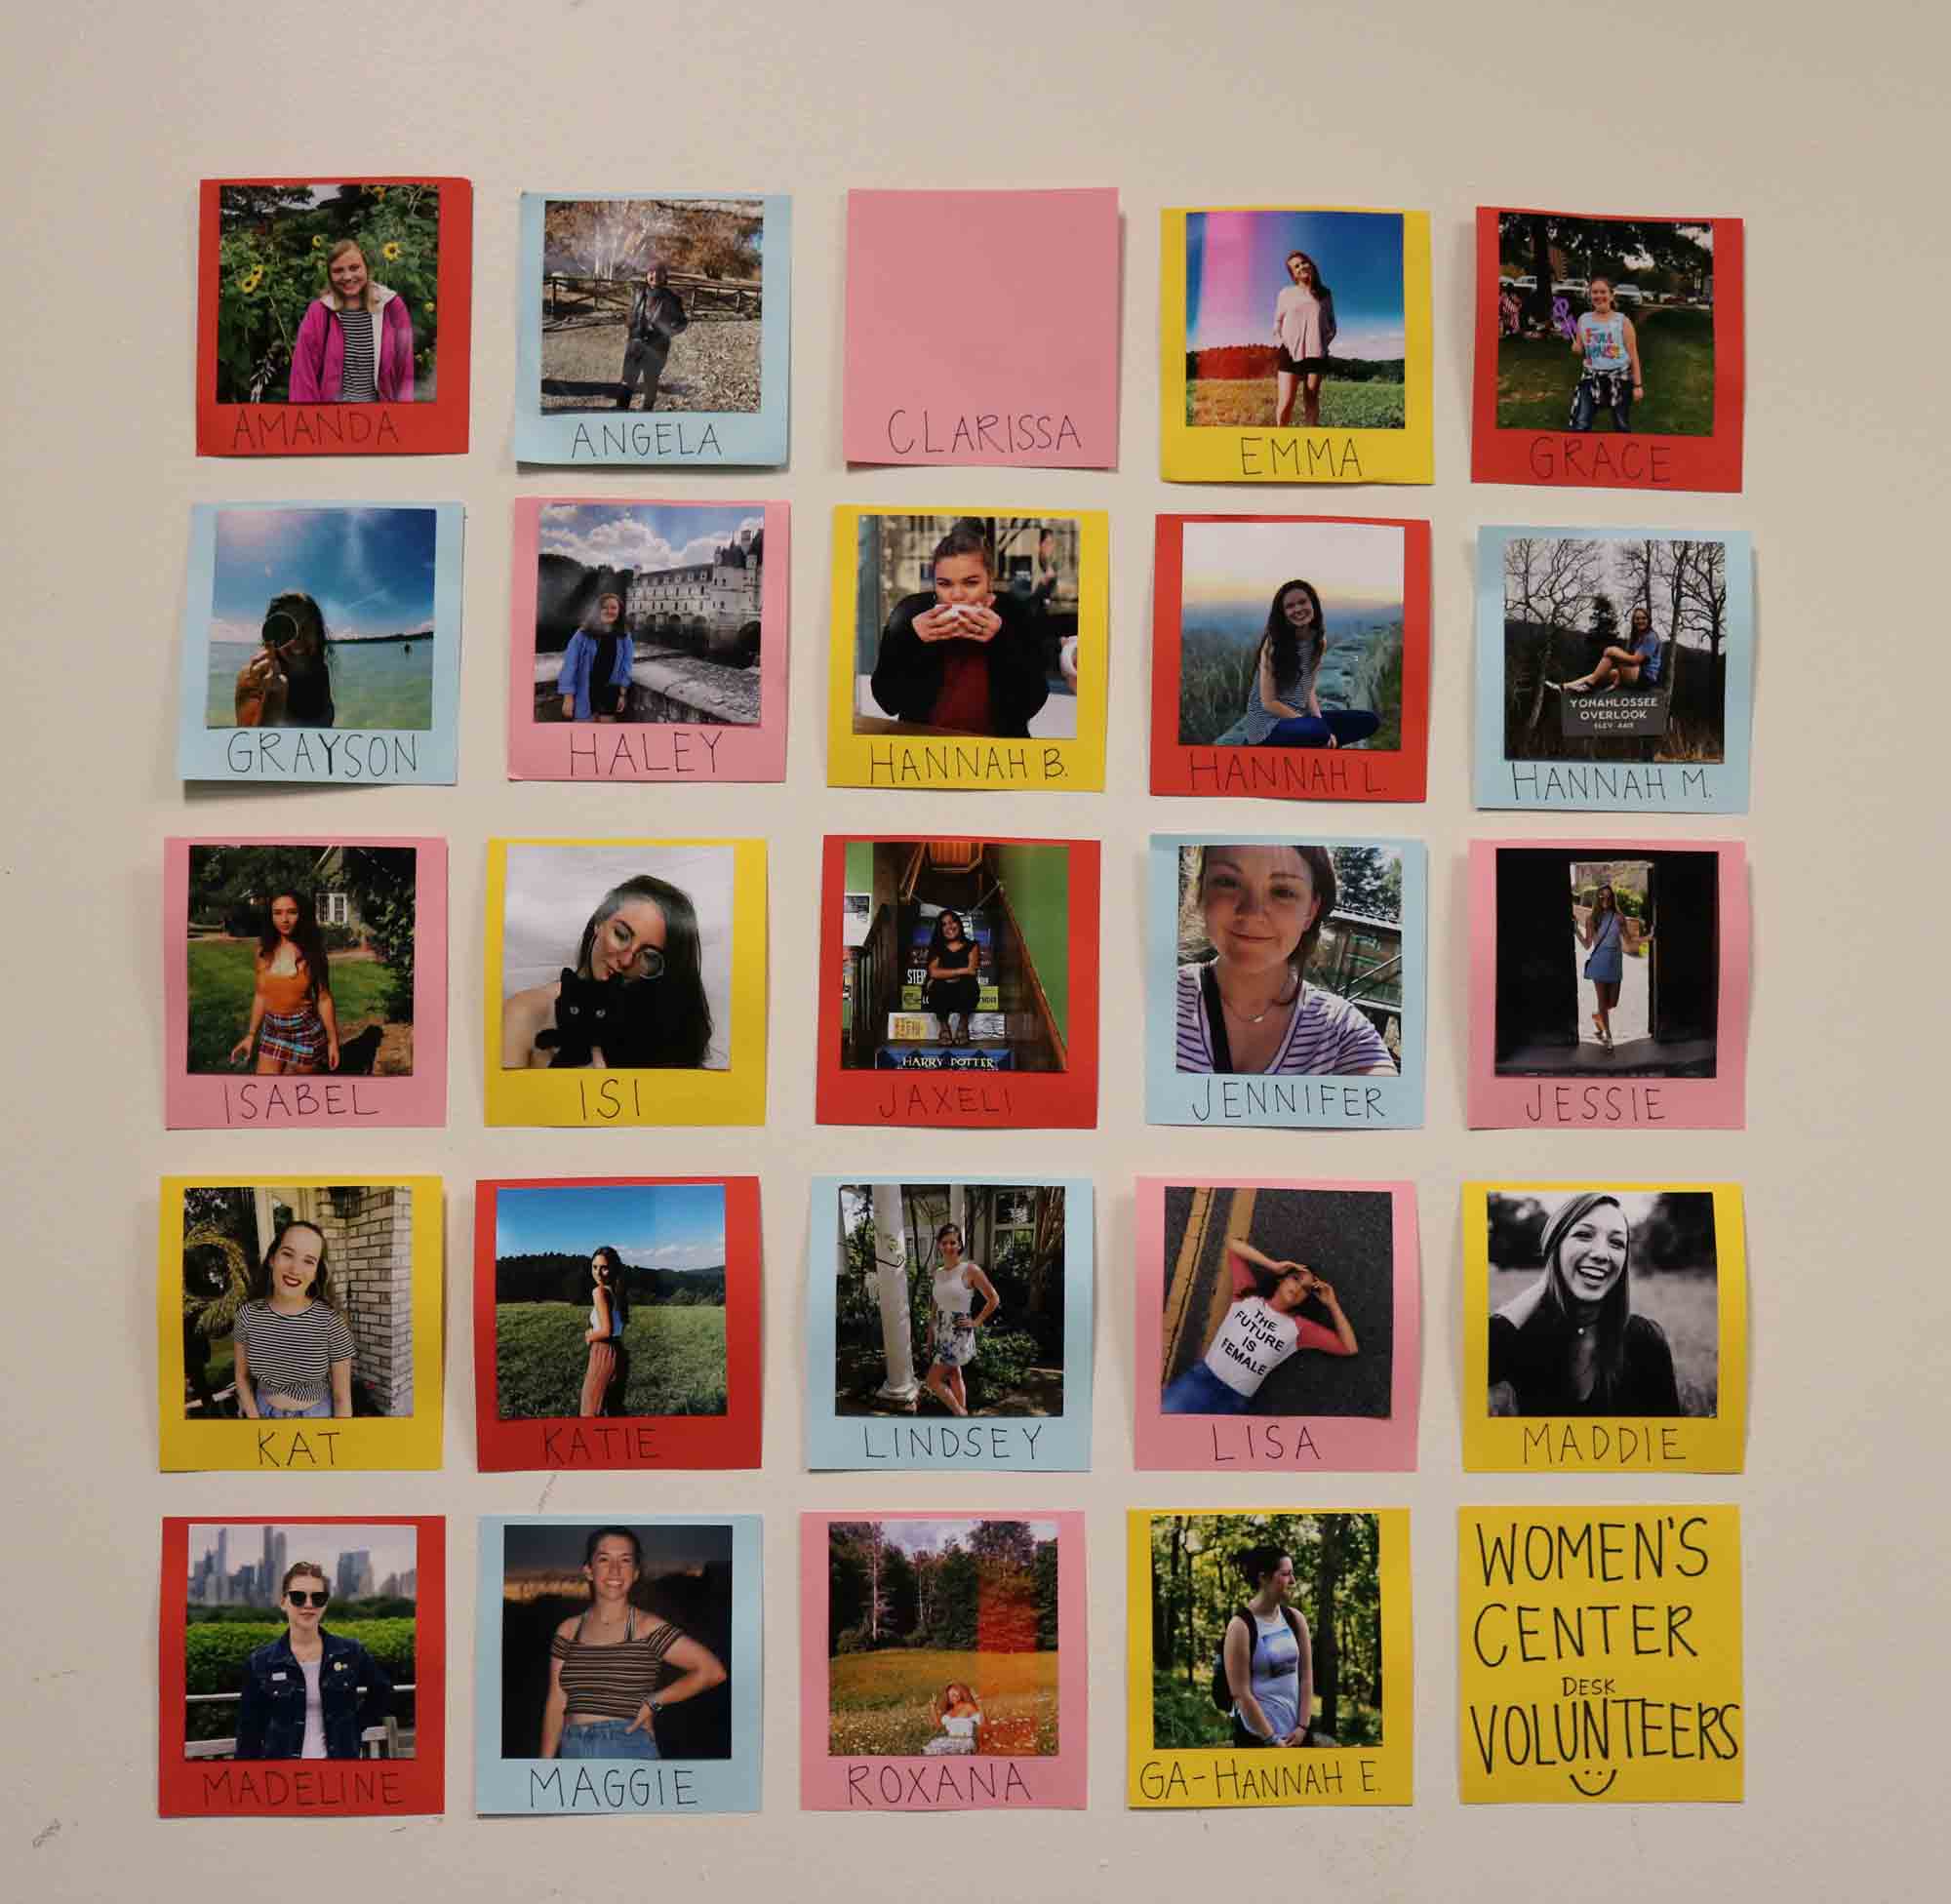 Pictures+of+volunteers+decorate+the+wall+of+the+Womens+Center.